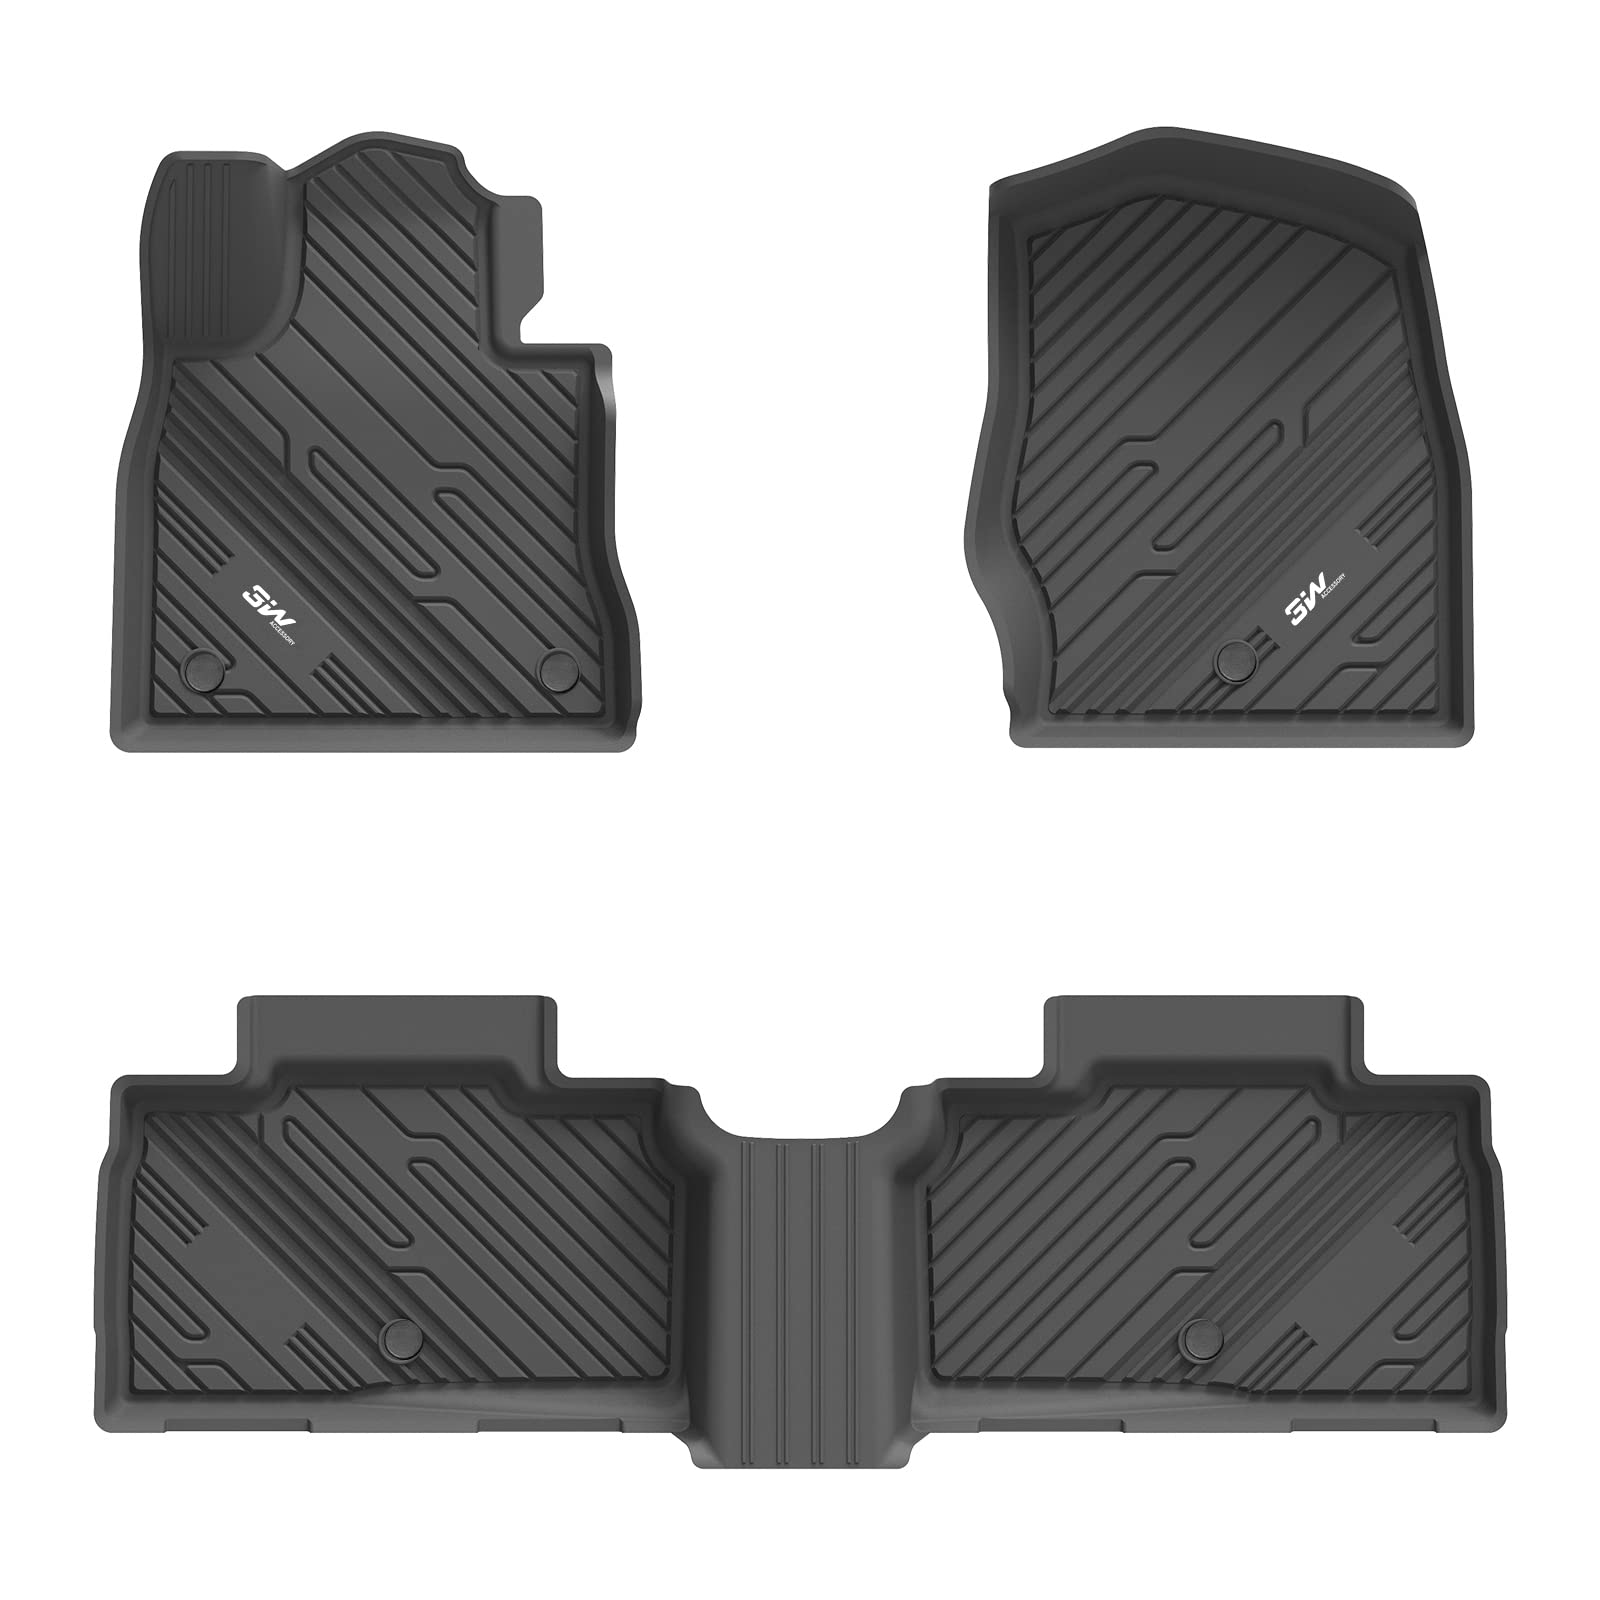 3W Ford Explorer 2020-2023 Custom Floor Mats TPE Material & All-Weather Protection Vehicles & Parts 3Wliners 2020-2023 Explorer 2020-2023 7 Seat 1st&2nd Row Mats